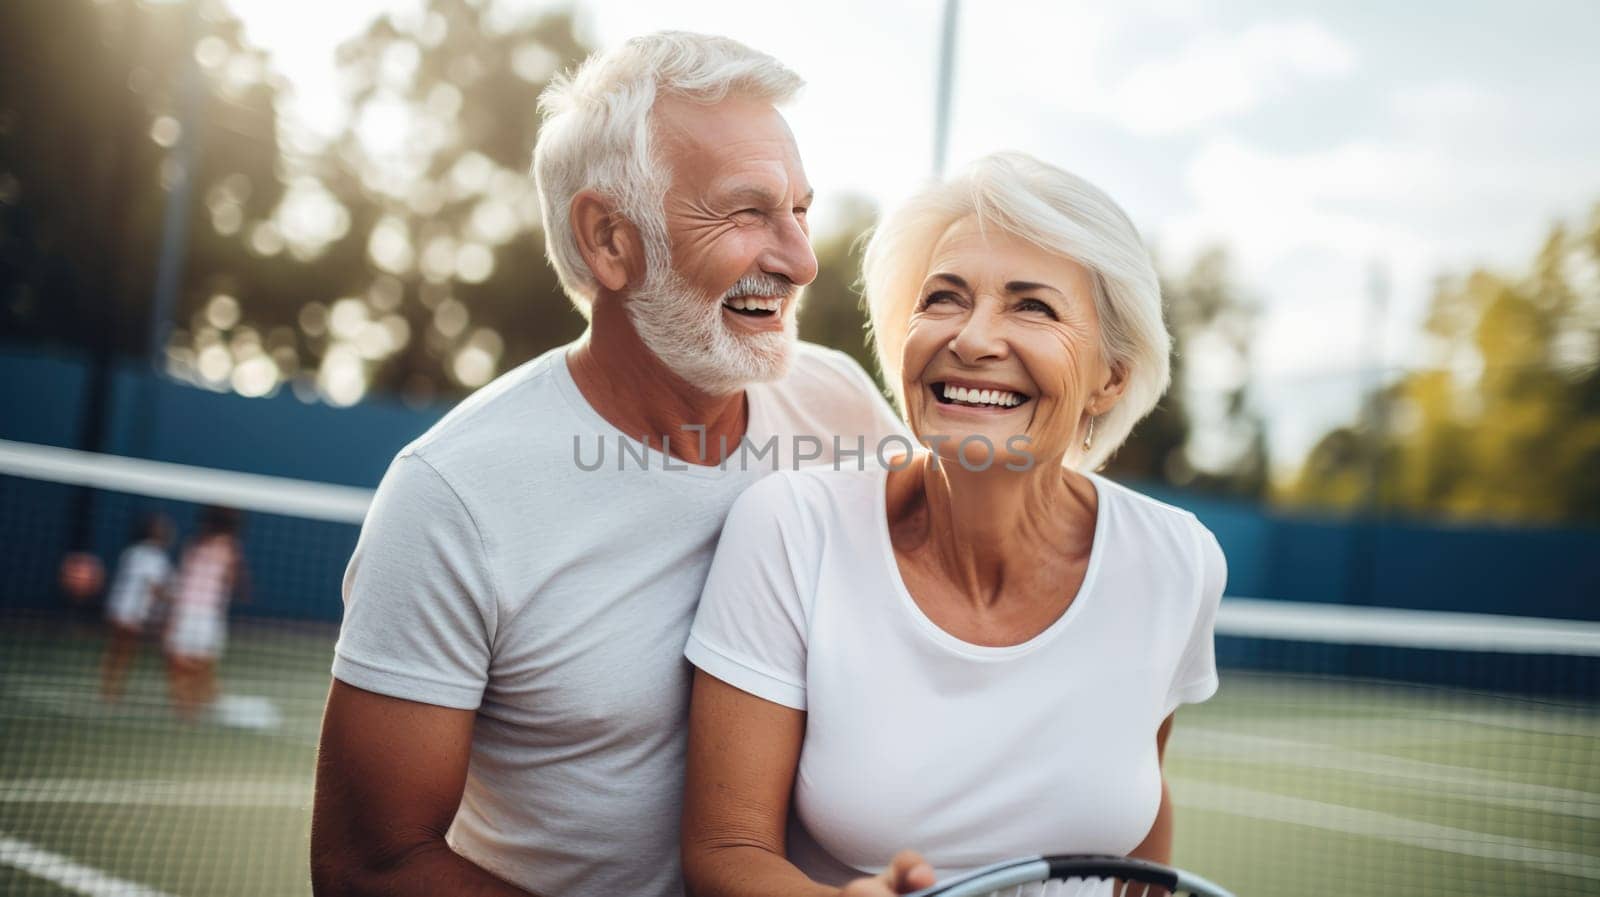 Happy elderly couple in sporty outfits smiling on tennis court, enjoying active lifestyle together by JuliaDorian